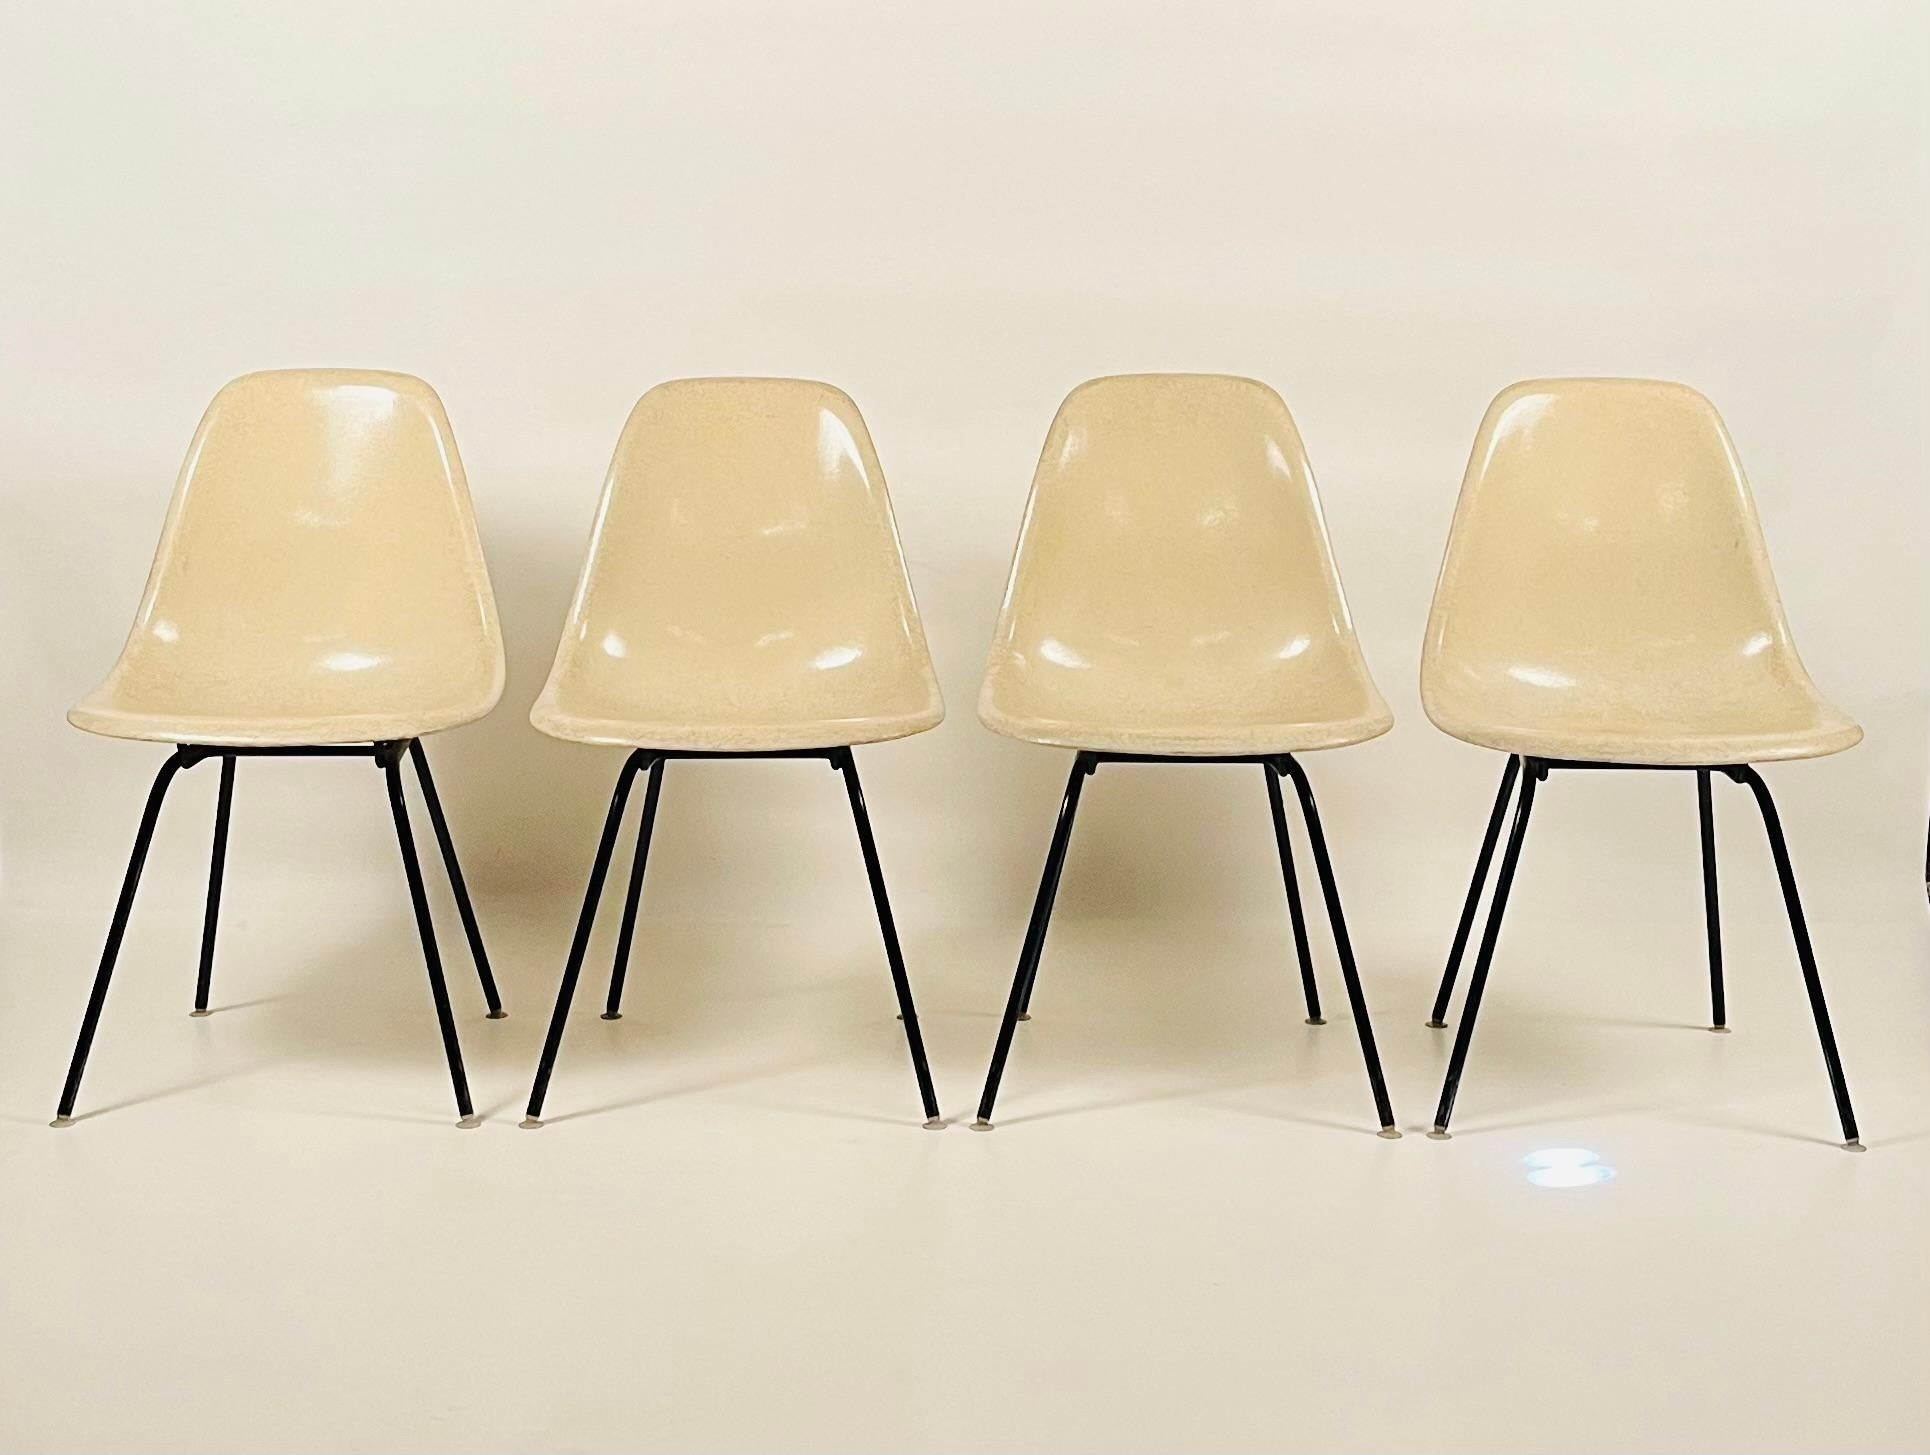 Set of 4 Vintage White Fiberglass Eames Chairs by Herman Miller For Sale 5